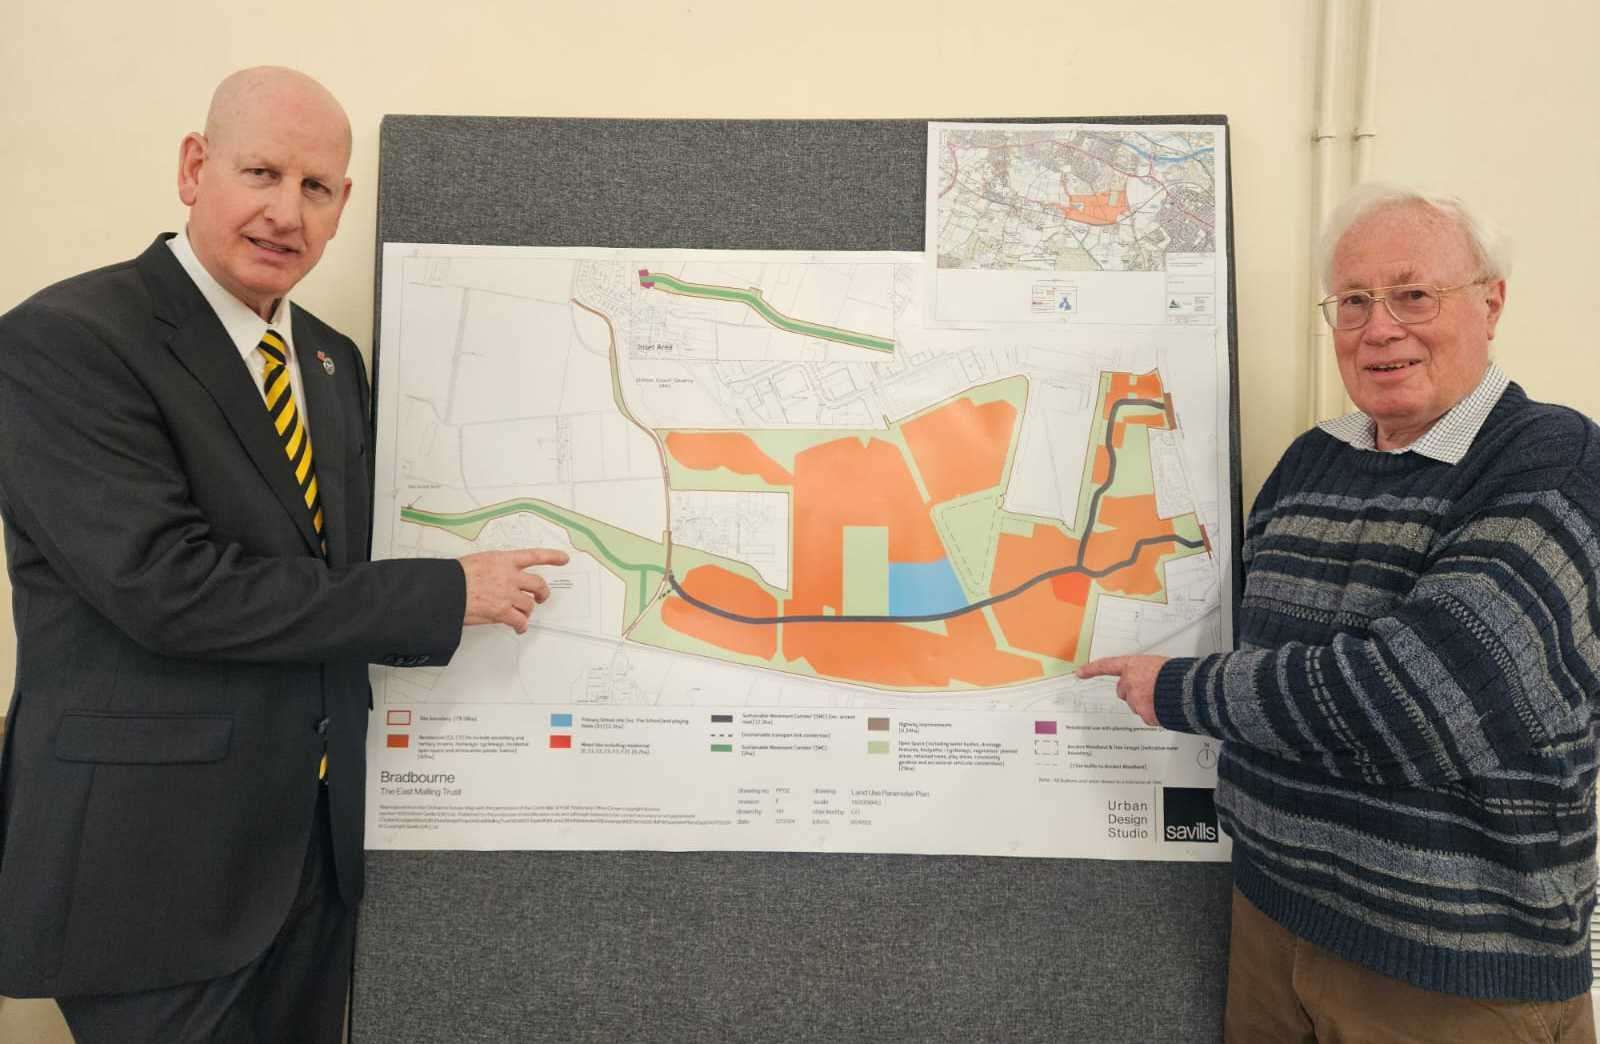 Cllrs Dave Naghi and David Thornewell at the public meeting to discuss plans from East Malling Research for 1300 homes at East Malling and Ditton